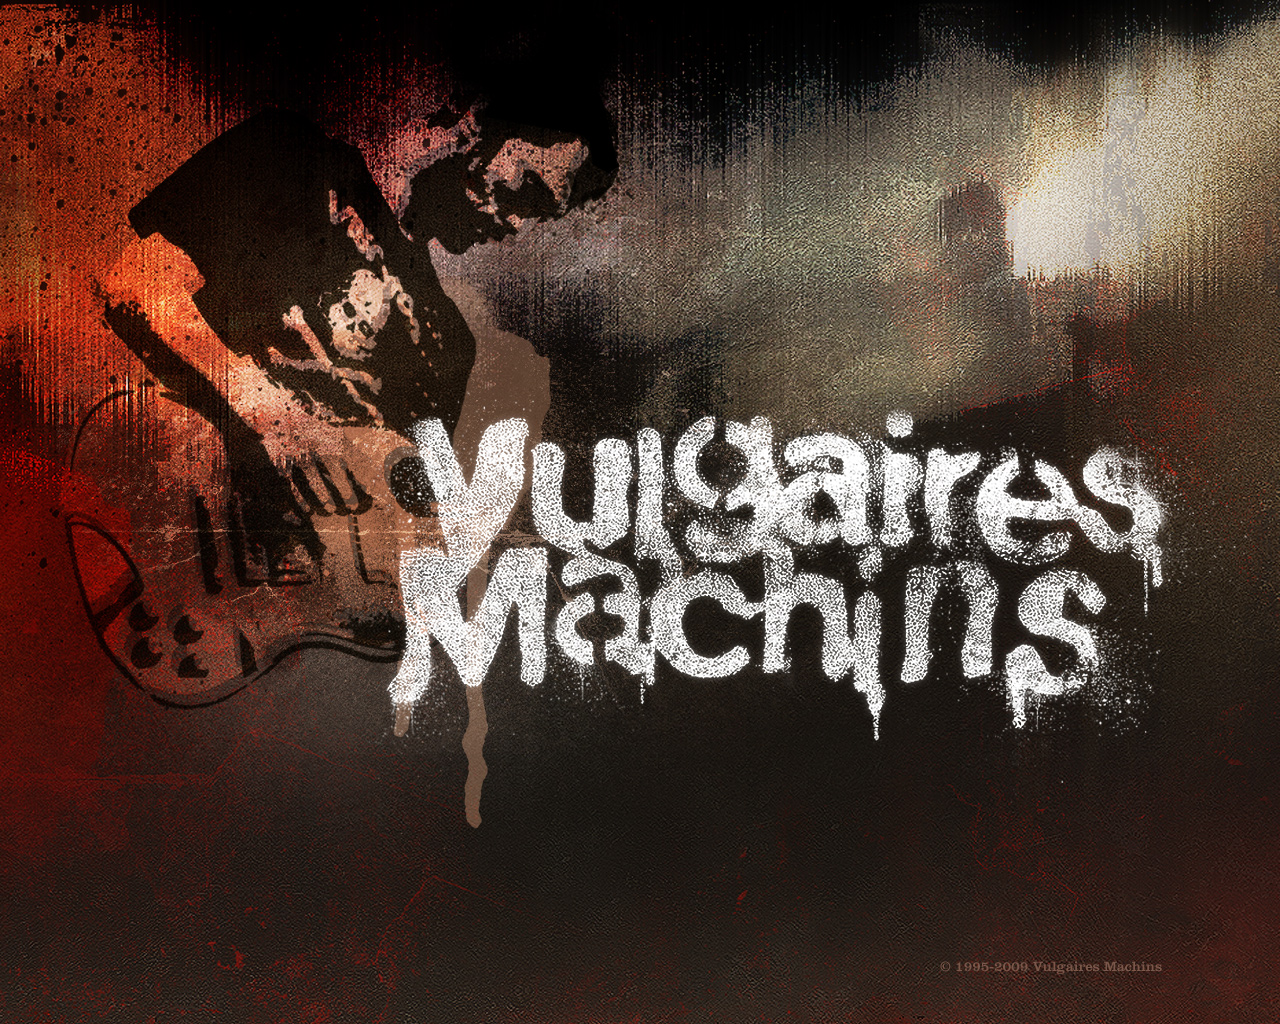 Nice wallpapers The Vulgaires Machins 1280x1024px